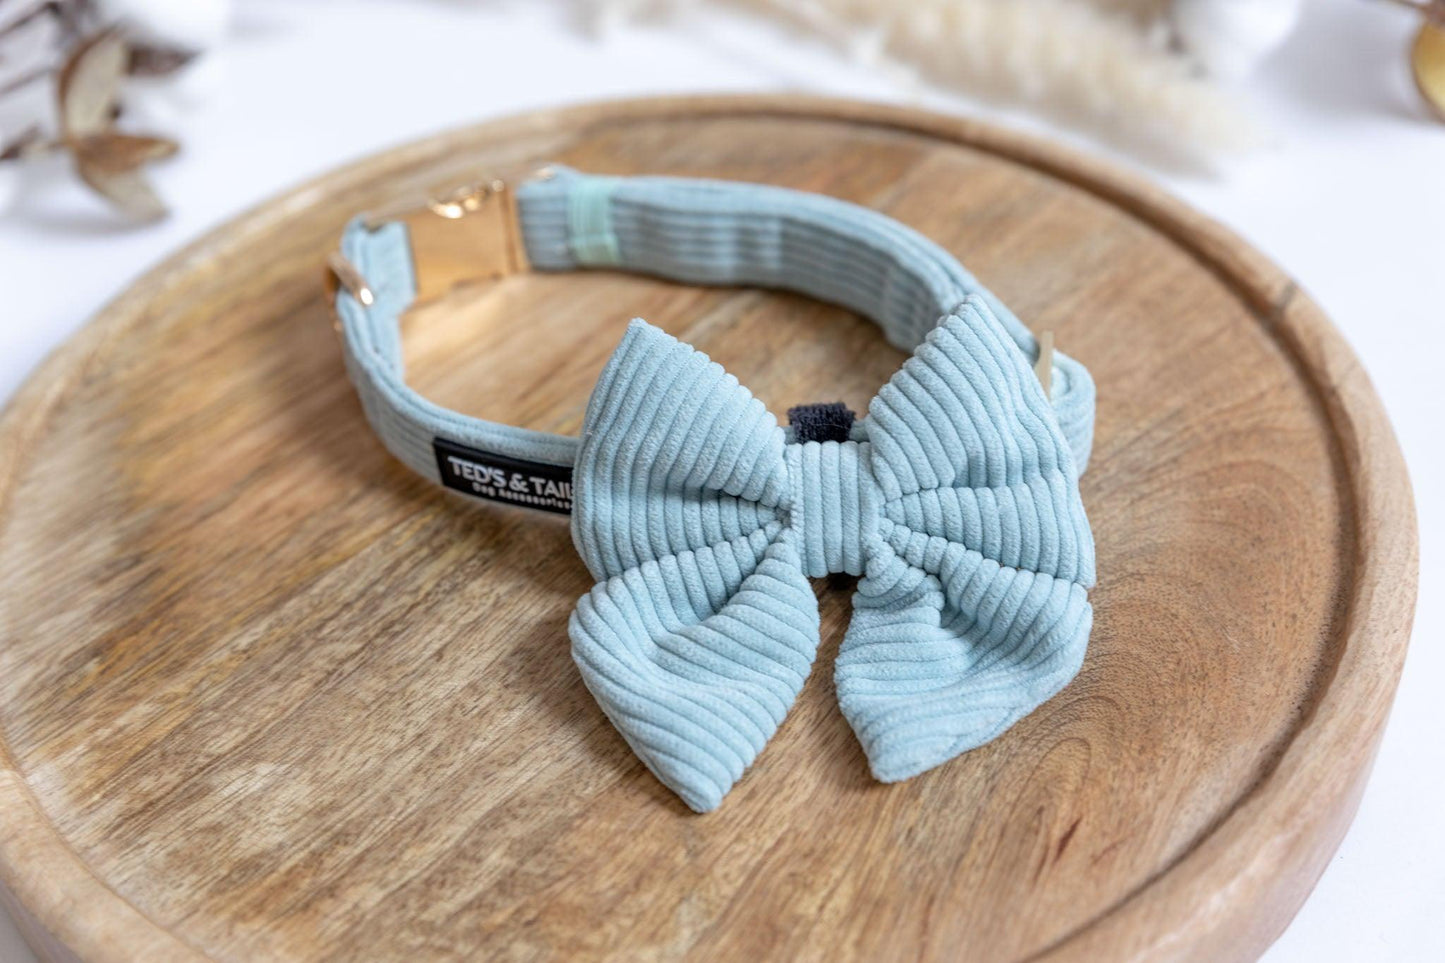 Halsband - Minty may - Ted's and Tails - boetiek, halsbanden, Outfit voor je hond, teds and tails, Vrolijke halsband voor je hond, Vrolijke honden halsband - By Marley